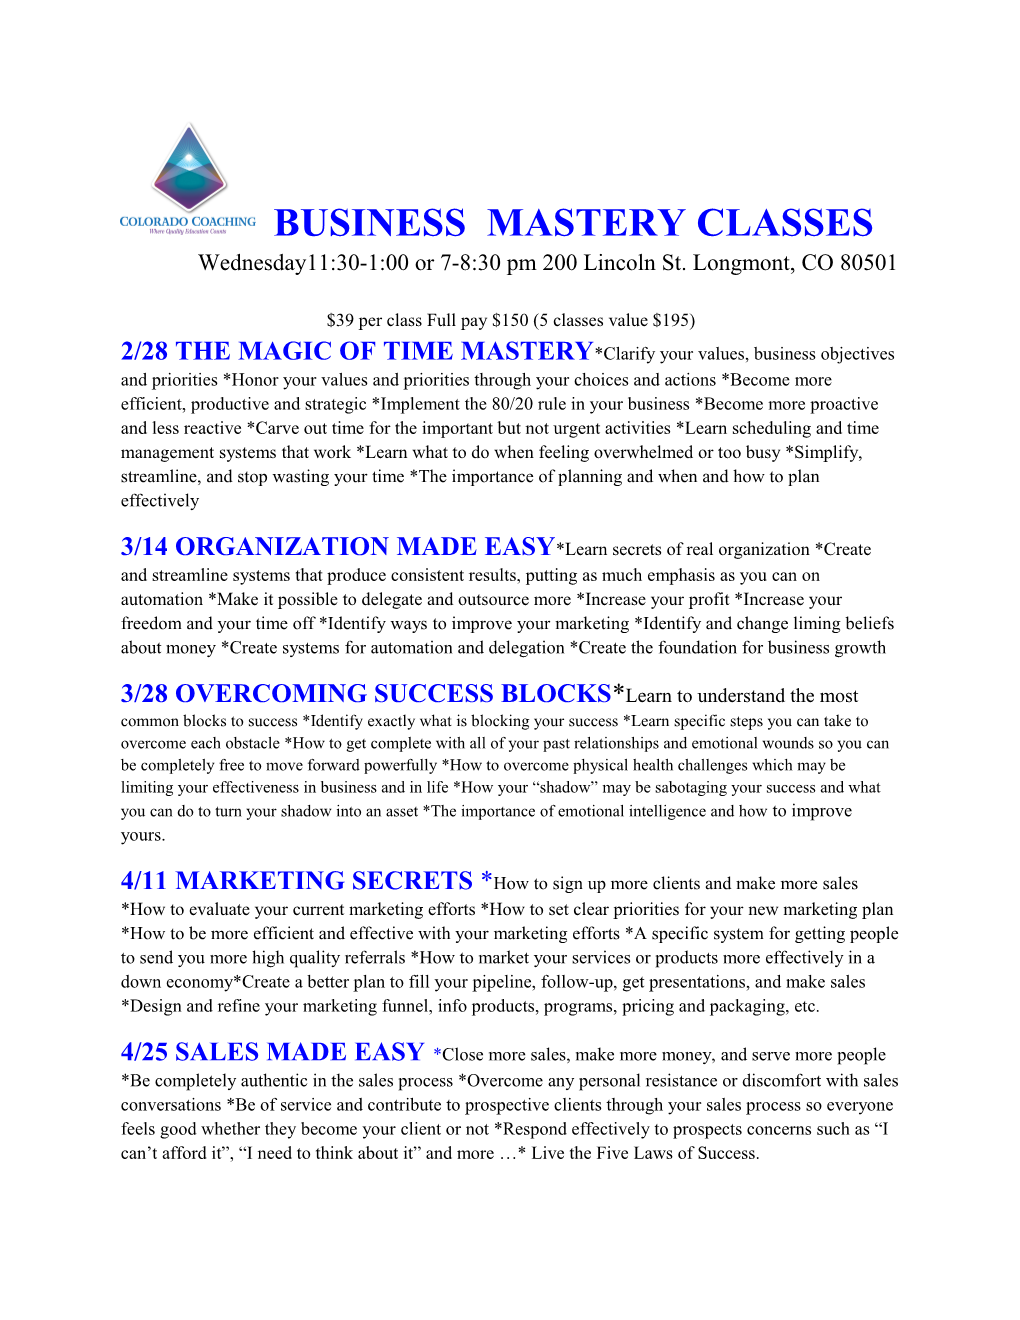 BUSINESS MASTERYCLASSES Wednesday11:30-1:00Or 7-8:30 Pm 200 Lincoln St. Longmont, CO 80501